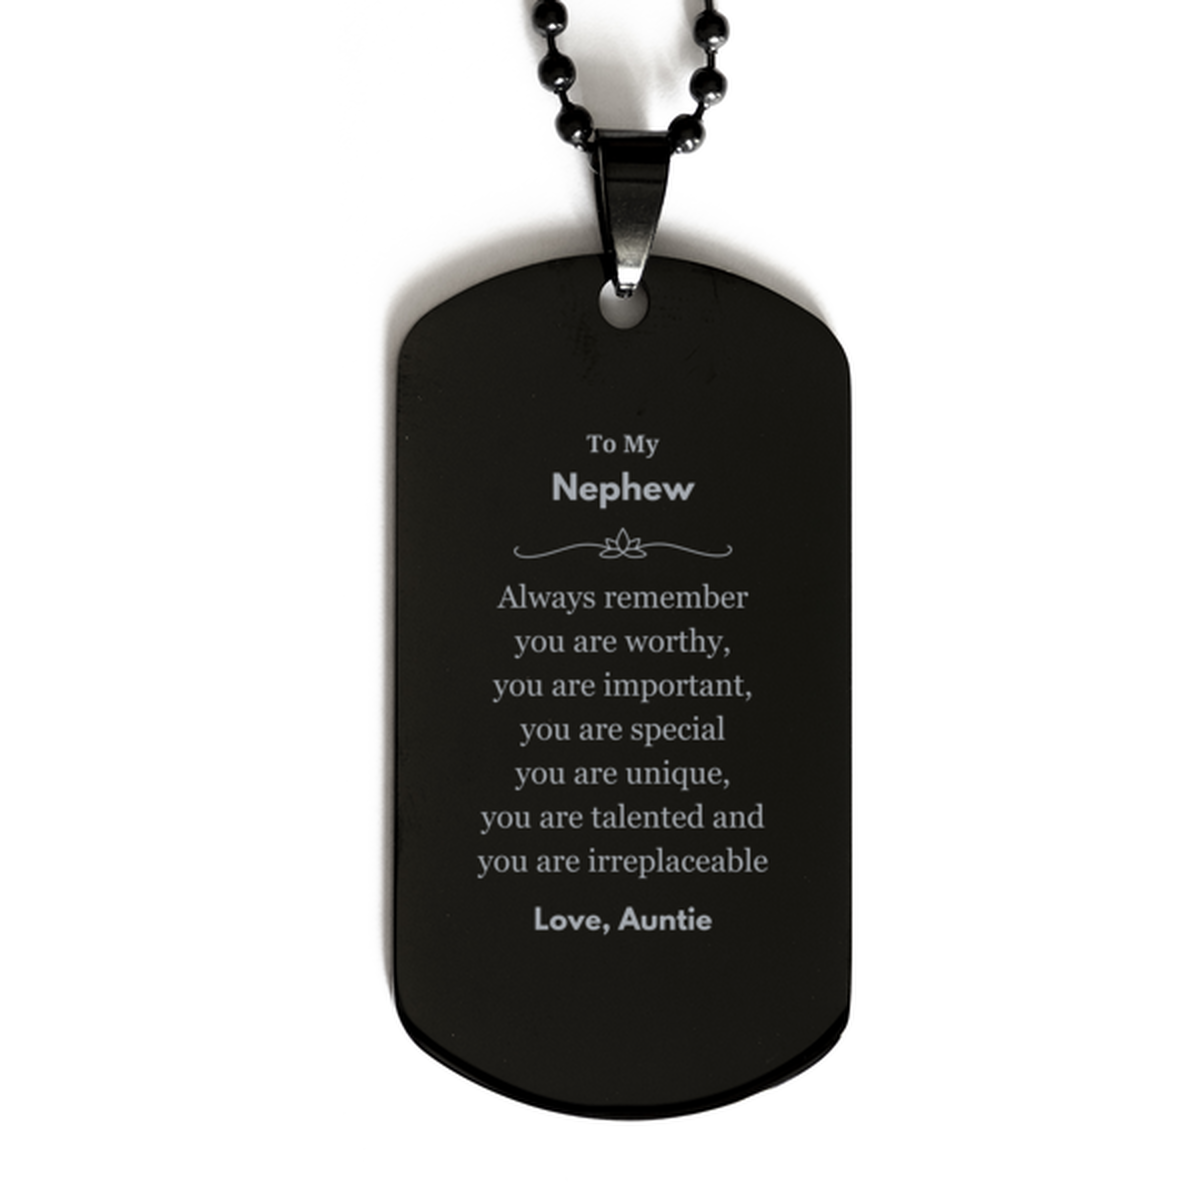 Nephew Birthday Gifts from Auntie, Inspirational Black Dog Tag for Nephew Christmas Graduation Gifts for Nephew Always remember you are worthy, you are important. Love, Auntie